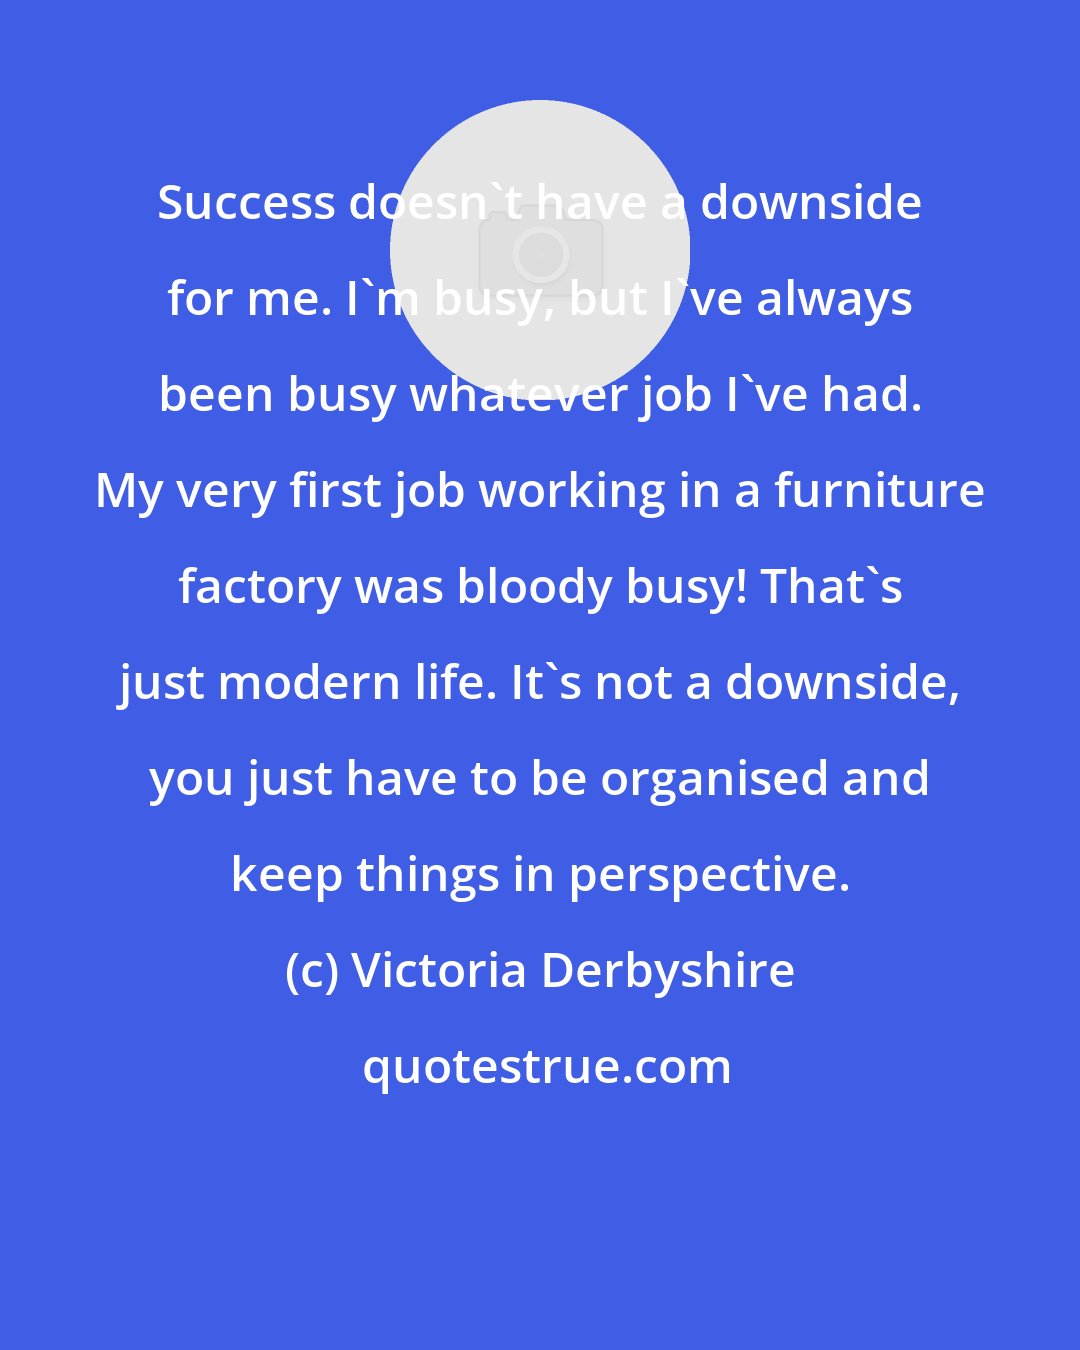 Victoria Derbyshire: Success doesn't have a downside for me. I'm busy, but I've always been busy whatever job I've had. My very first job working in a furniture factory was bloody busy! That's just modern life. It's not a downside, you just have to be organised and keep things in perspective.